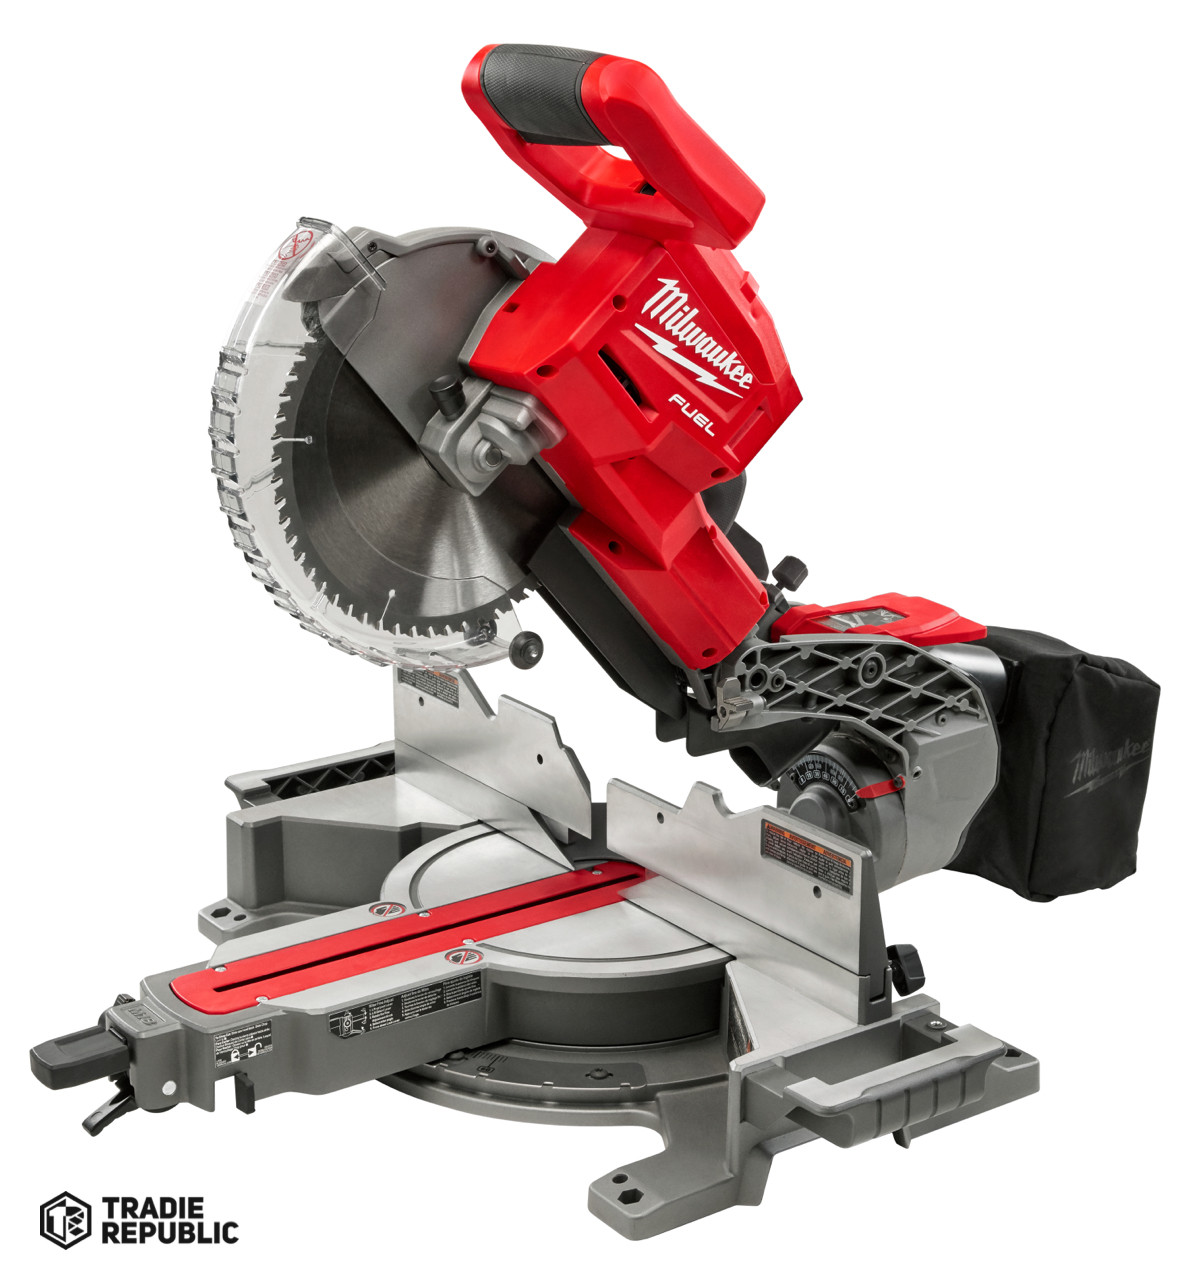 M18FMS254-0 Milwaukee M18 254mm Fuel Mitre Saw - Tool only